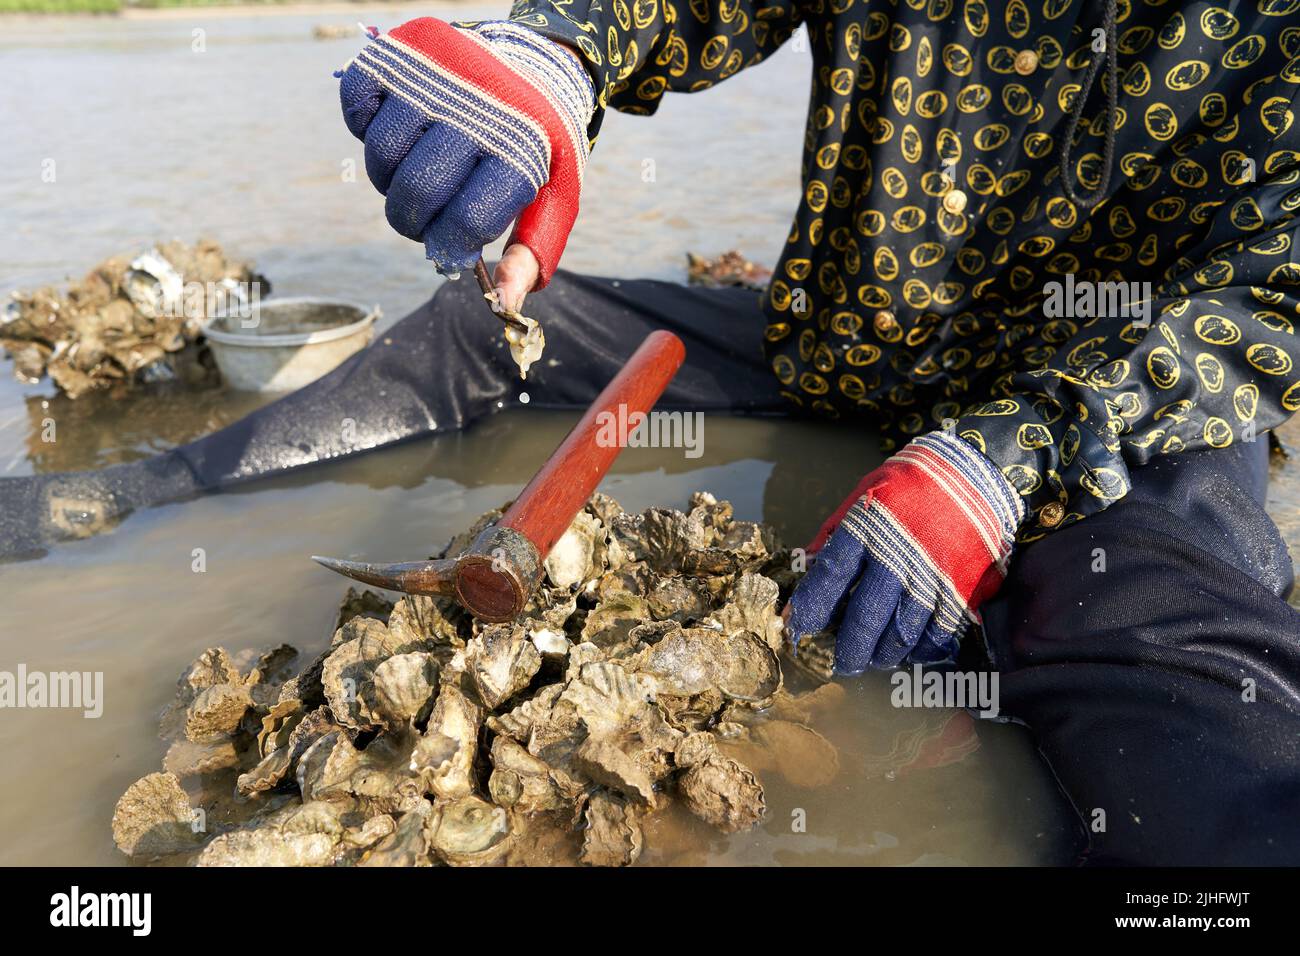 Ko Phangan, Thailand, March 15, 2022: gloved hand using a tool to collect clams Stock Photo